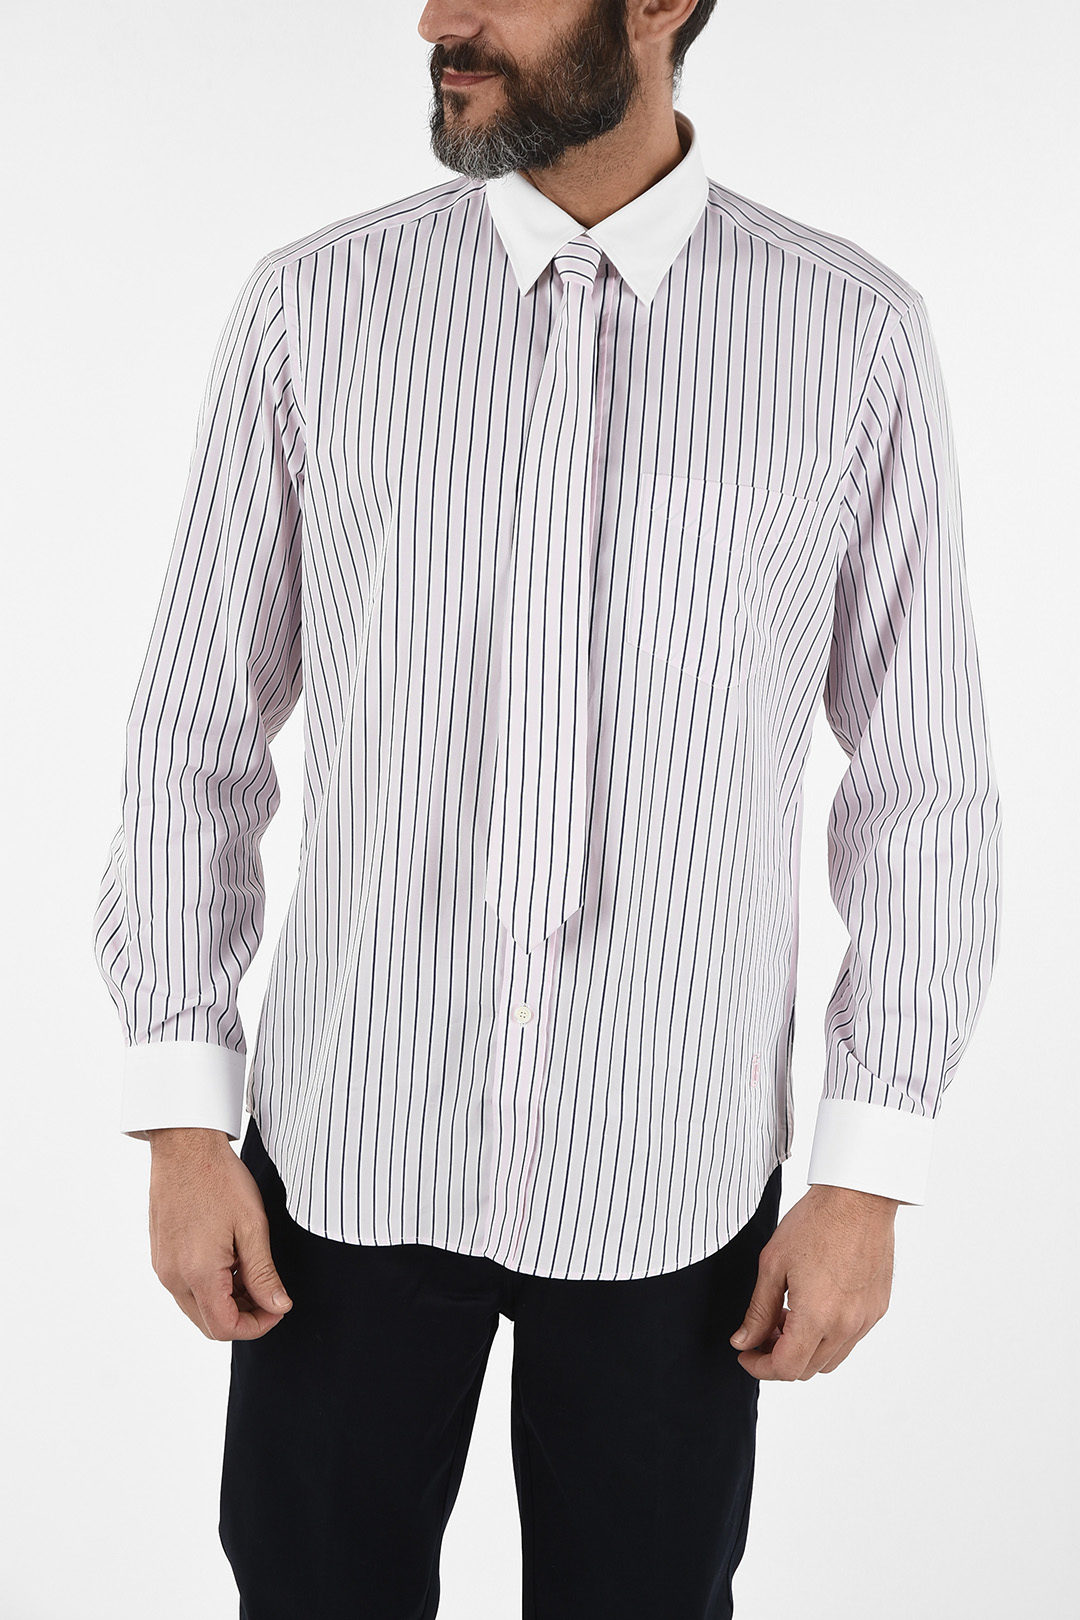 Burberry awning striped shirt with Tie men - Glamood Outlet